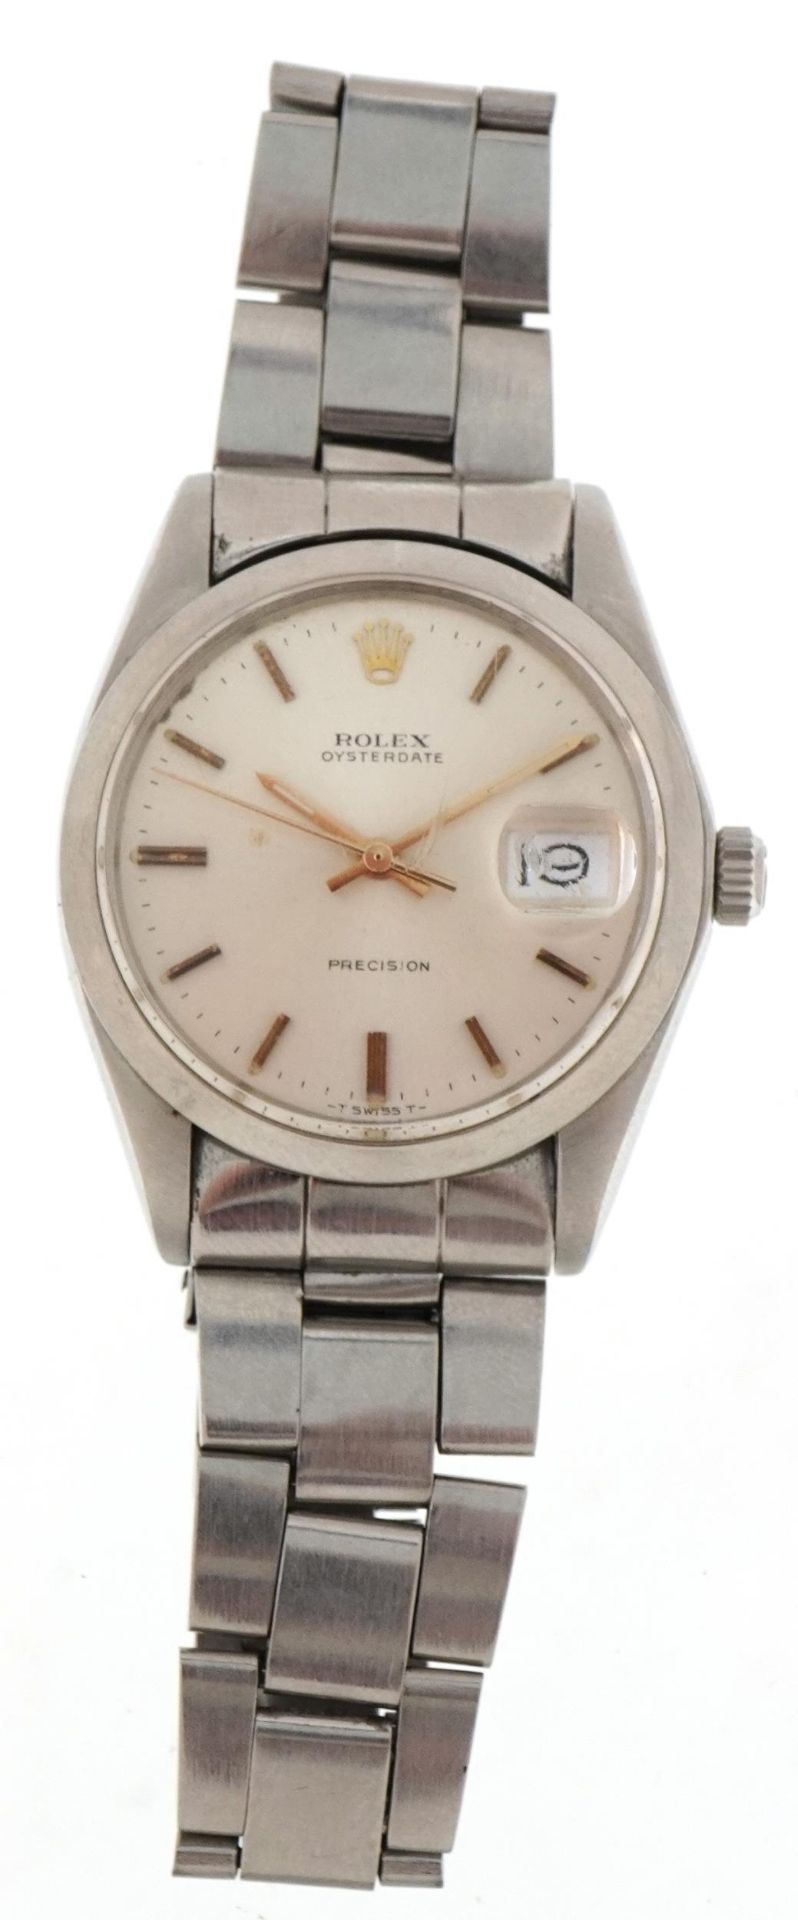 Rolex, gentlemen's Rolex Oysterdate wristwatch with certificate and paperwork housed in a Lassale - Image 2 of 7